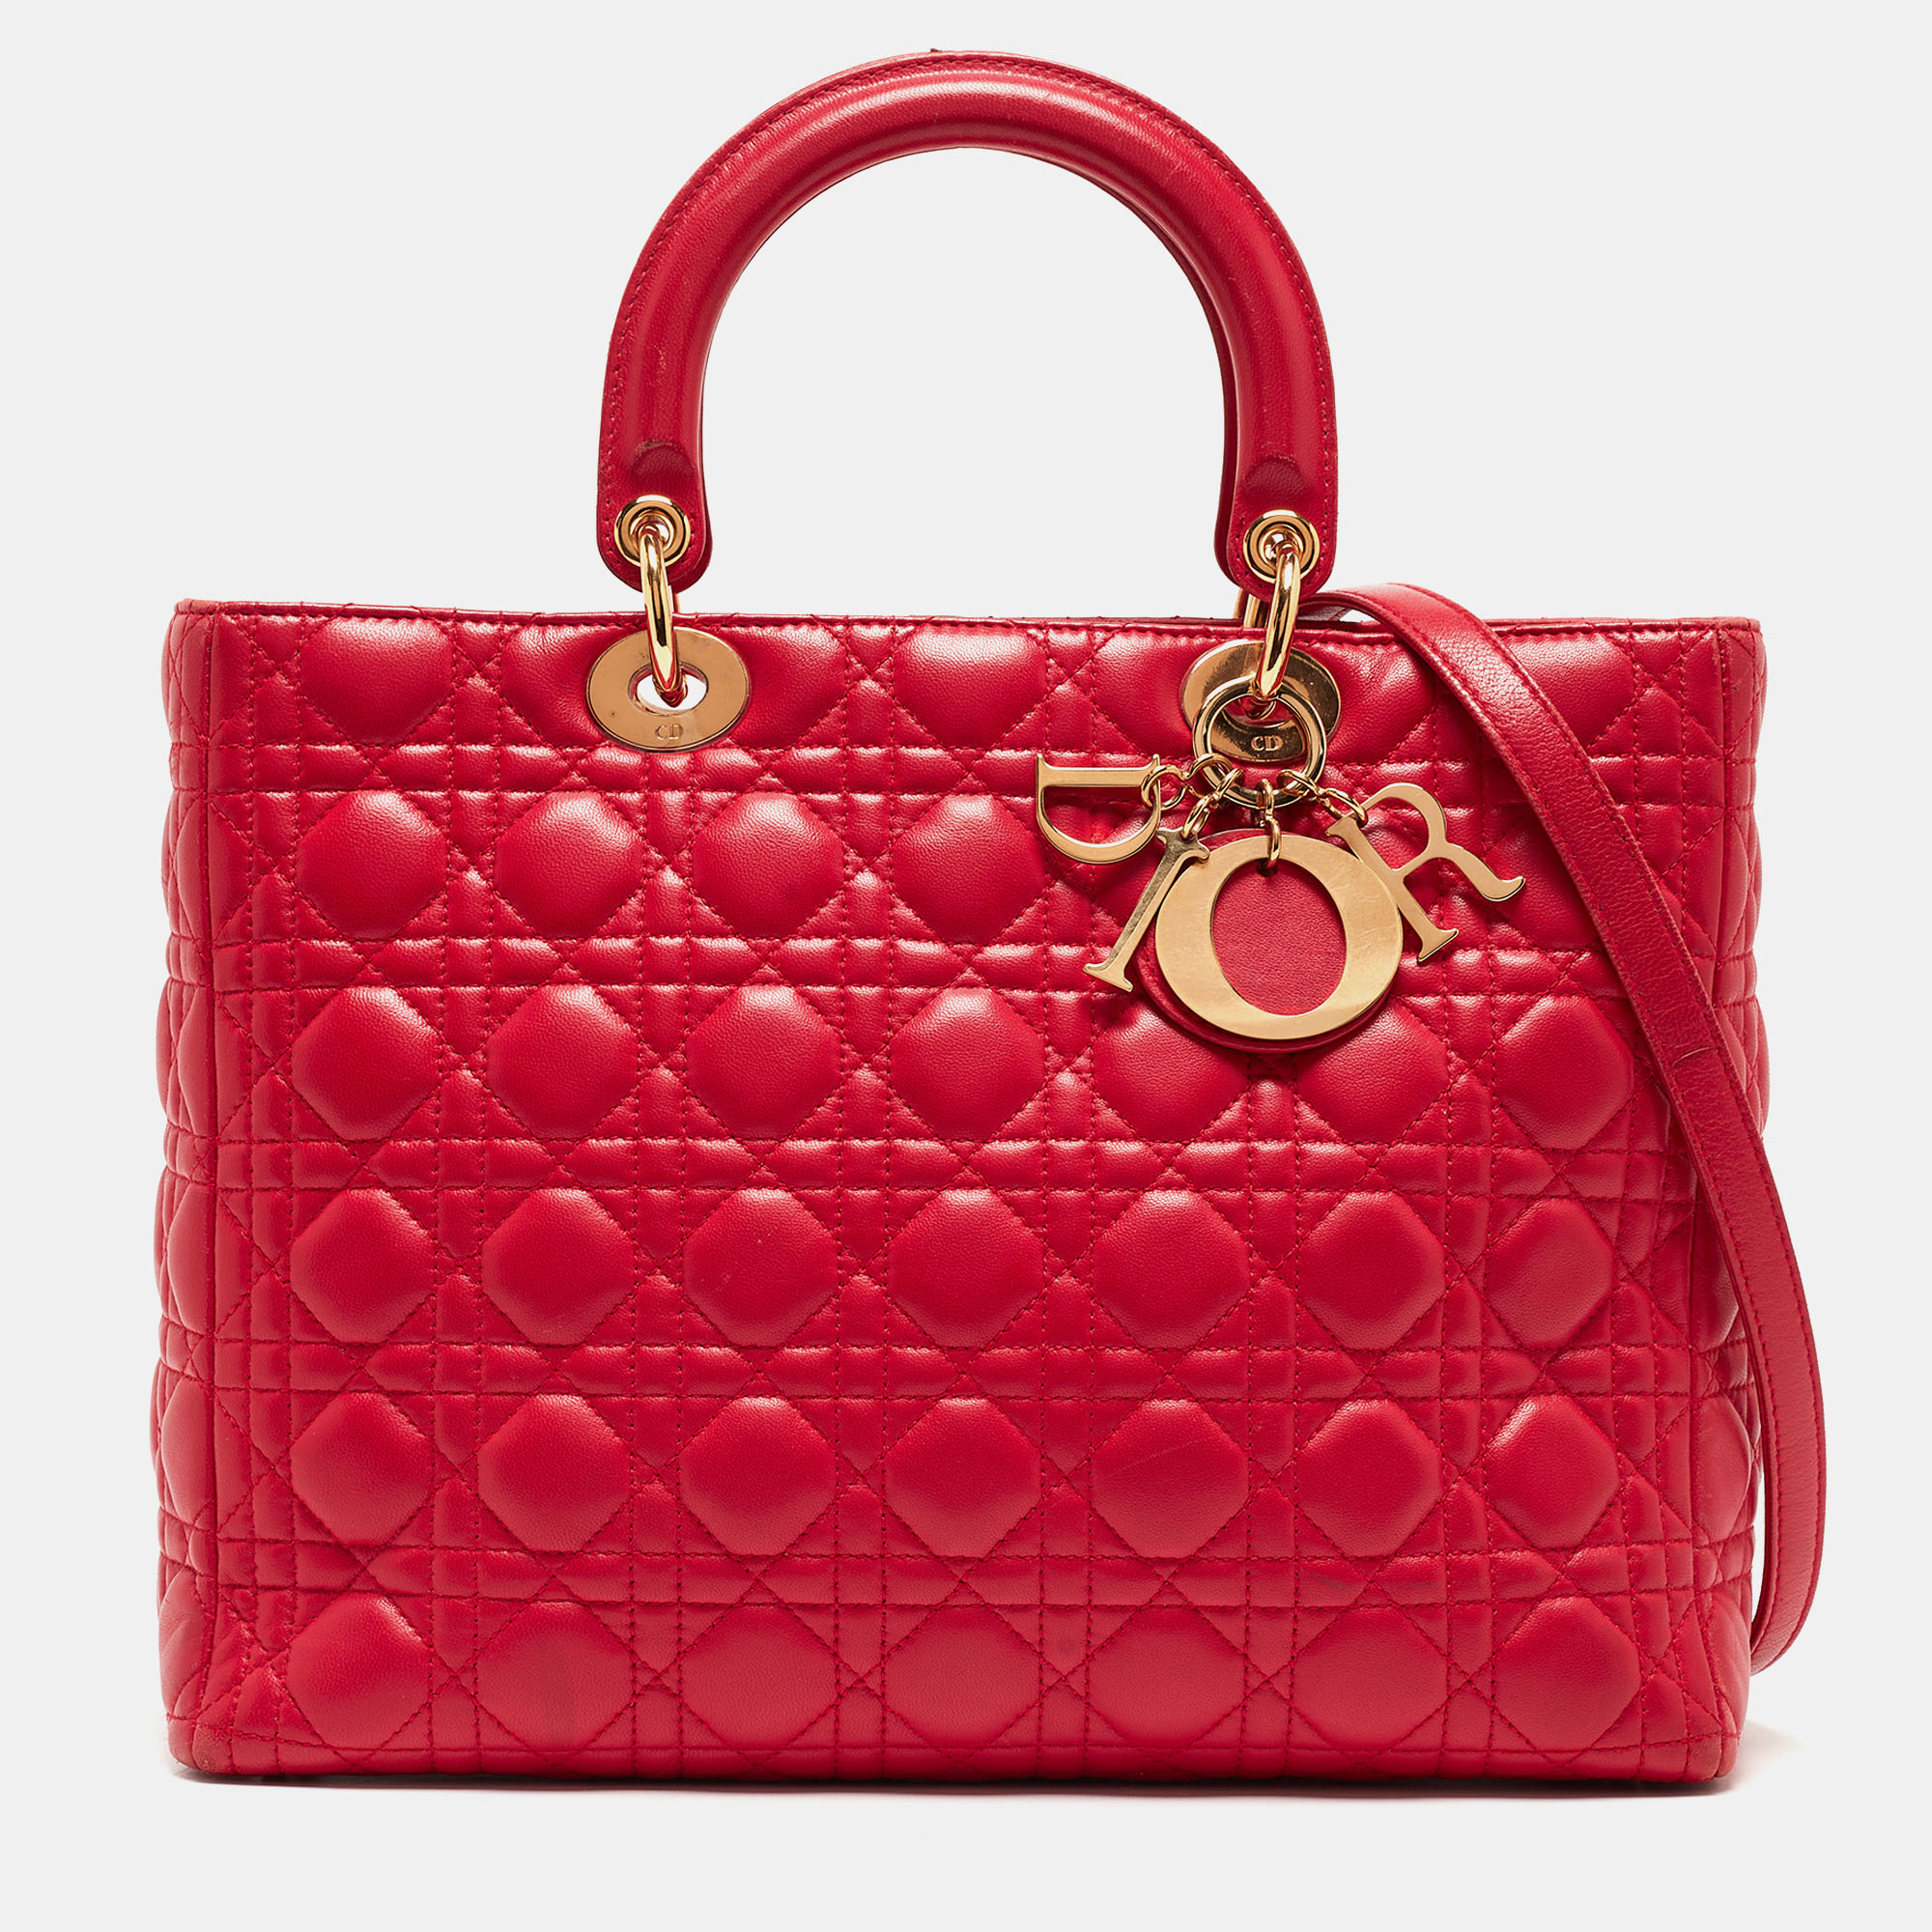 Dior red cannage leather large lady dior tote